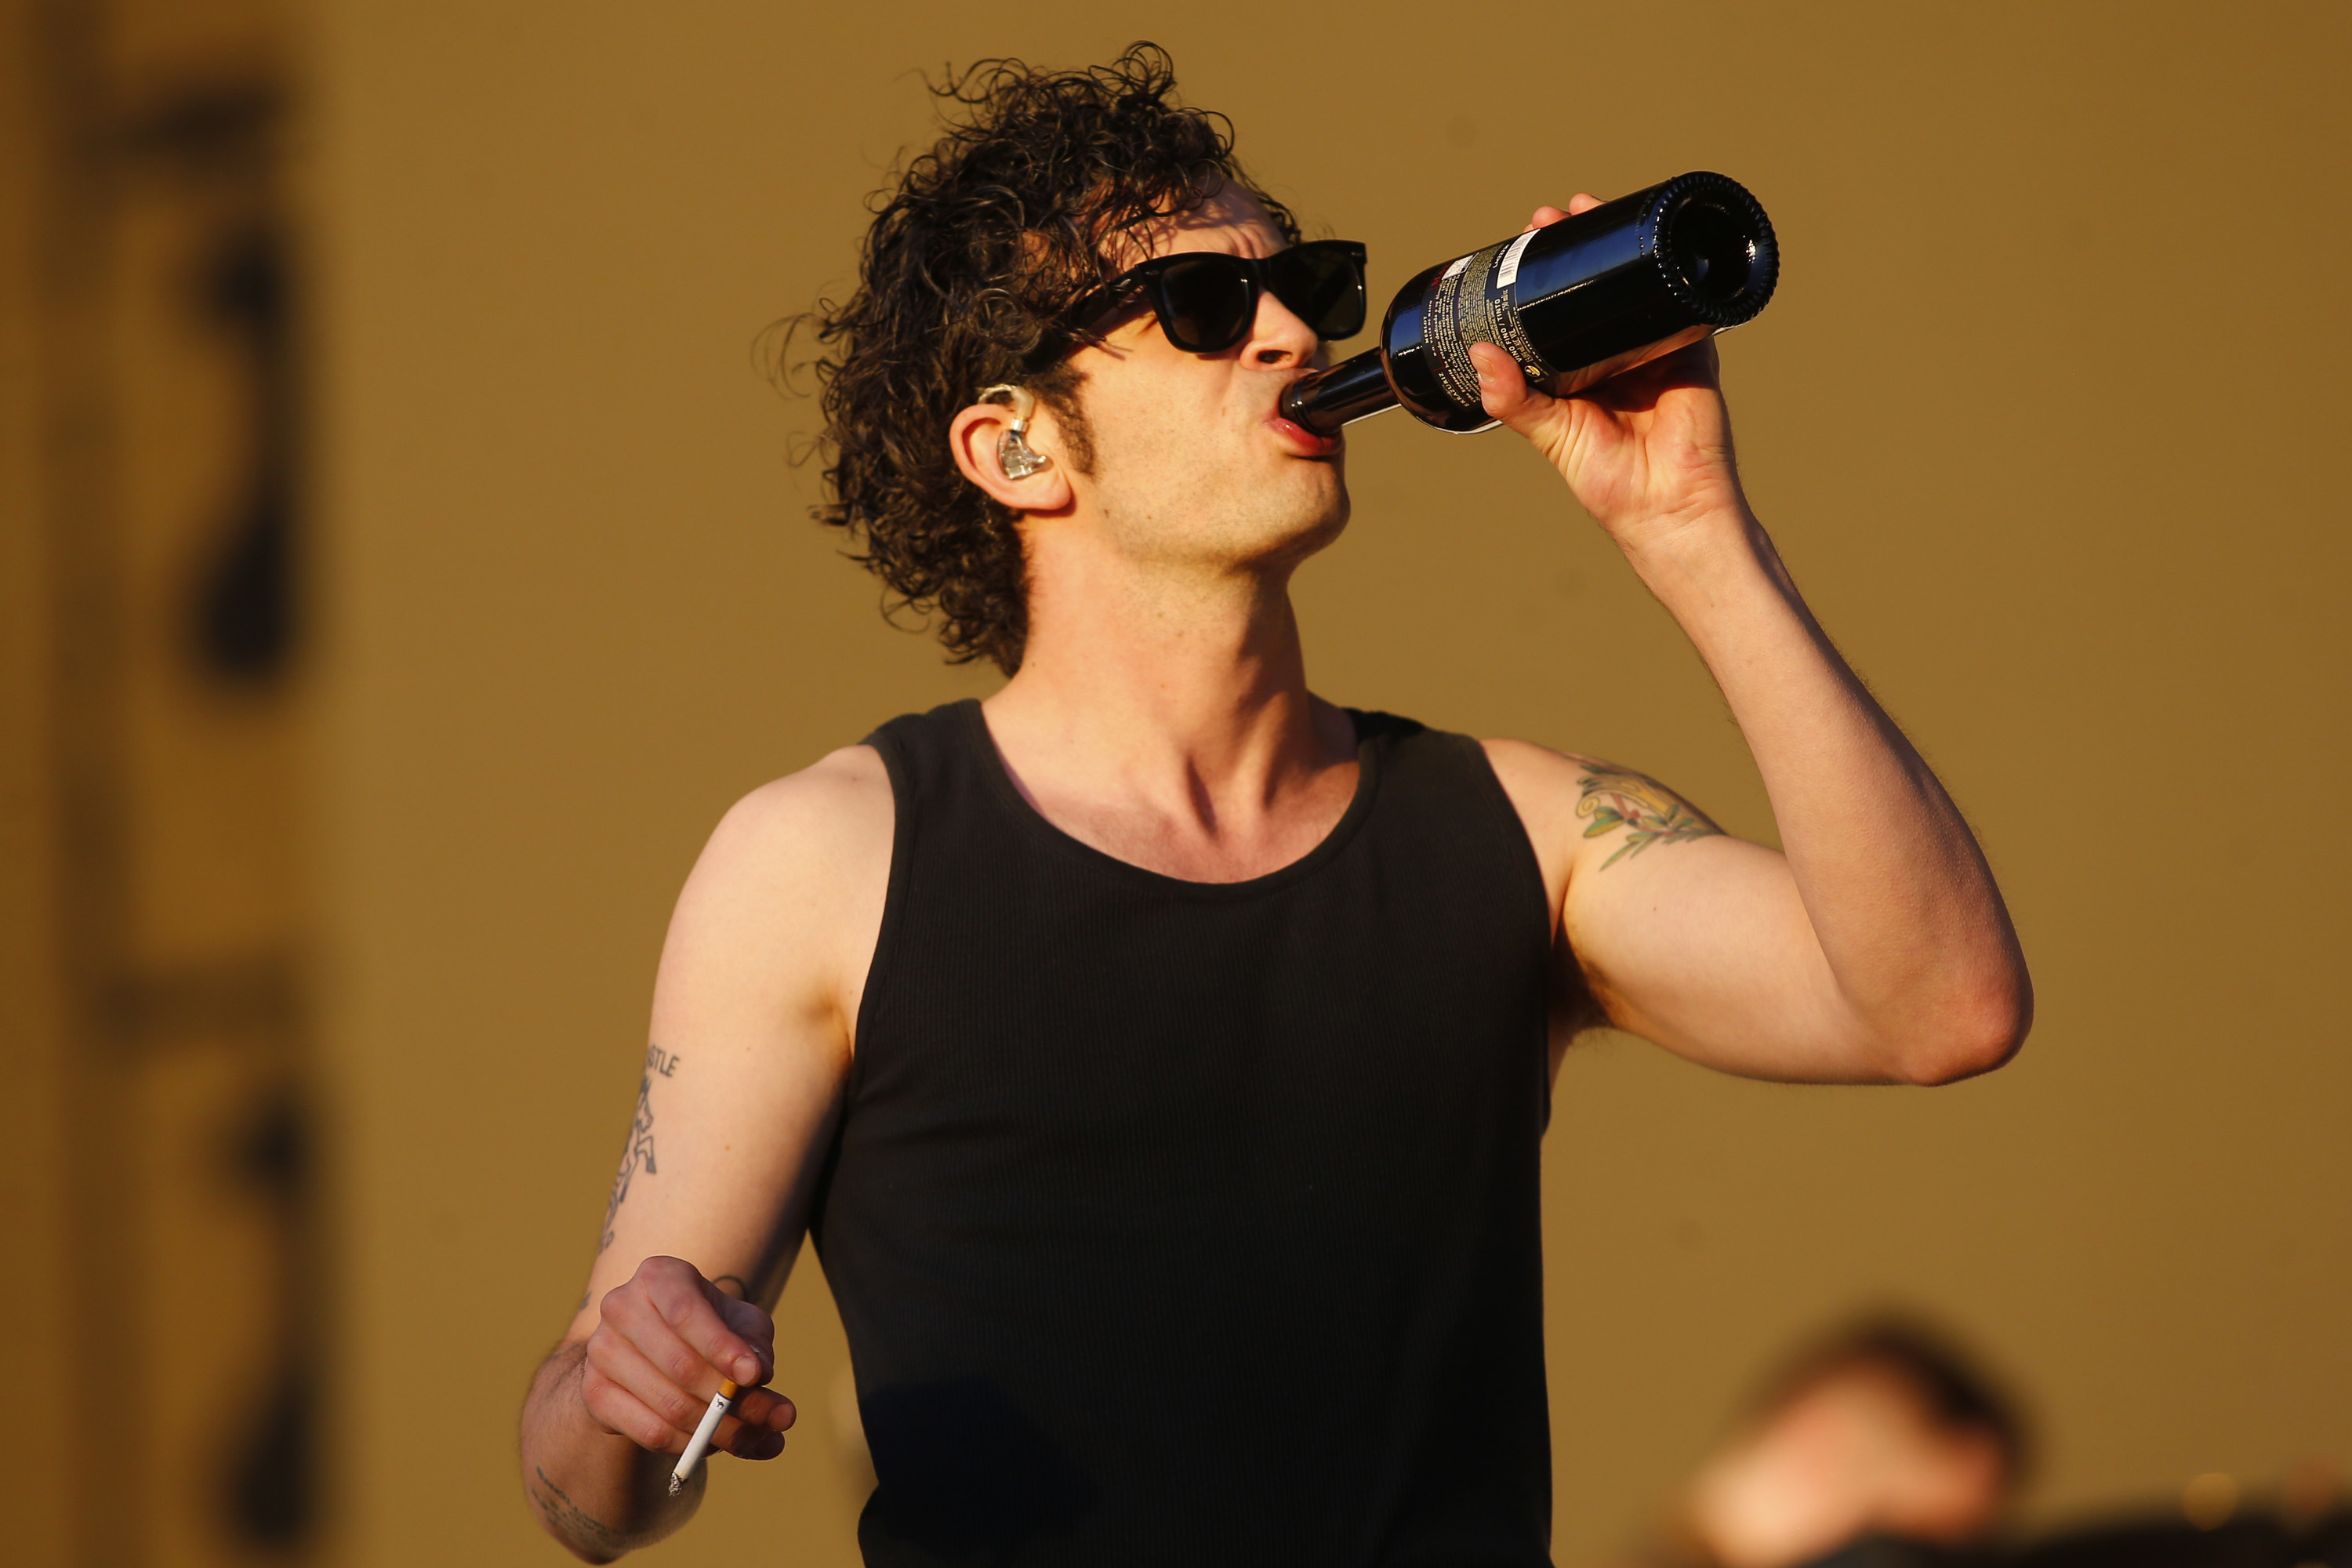 Matty drinking and holding a cigarette